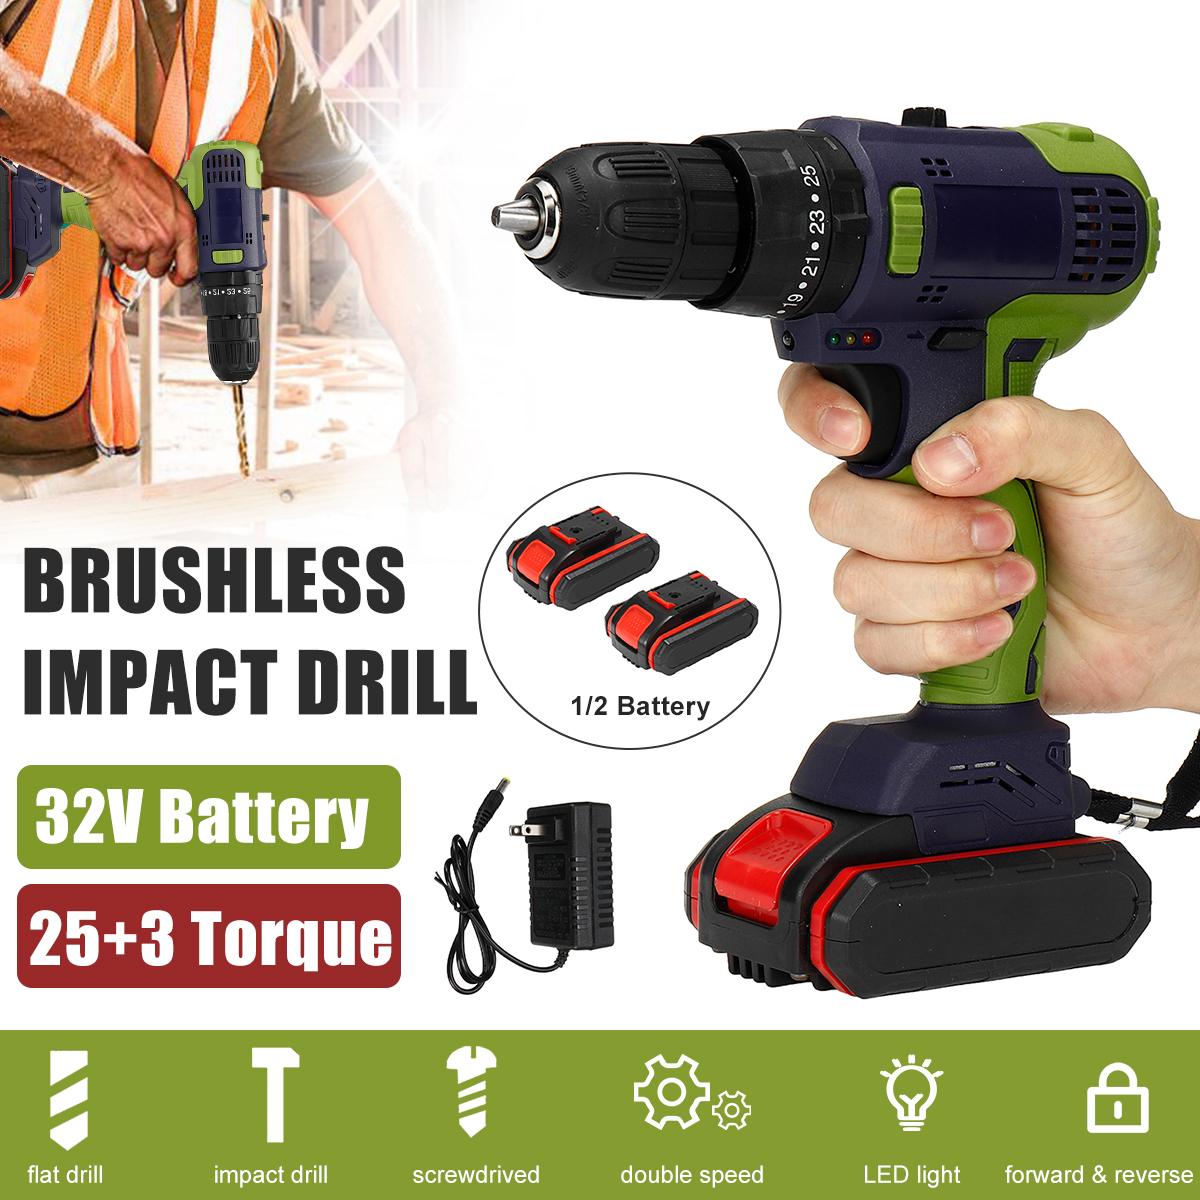 32V-Brushless-Impact-Drill-Lithium-Electric-Torque-Drill-Driver-With-12-Battery-LED-Light-1837414-2